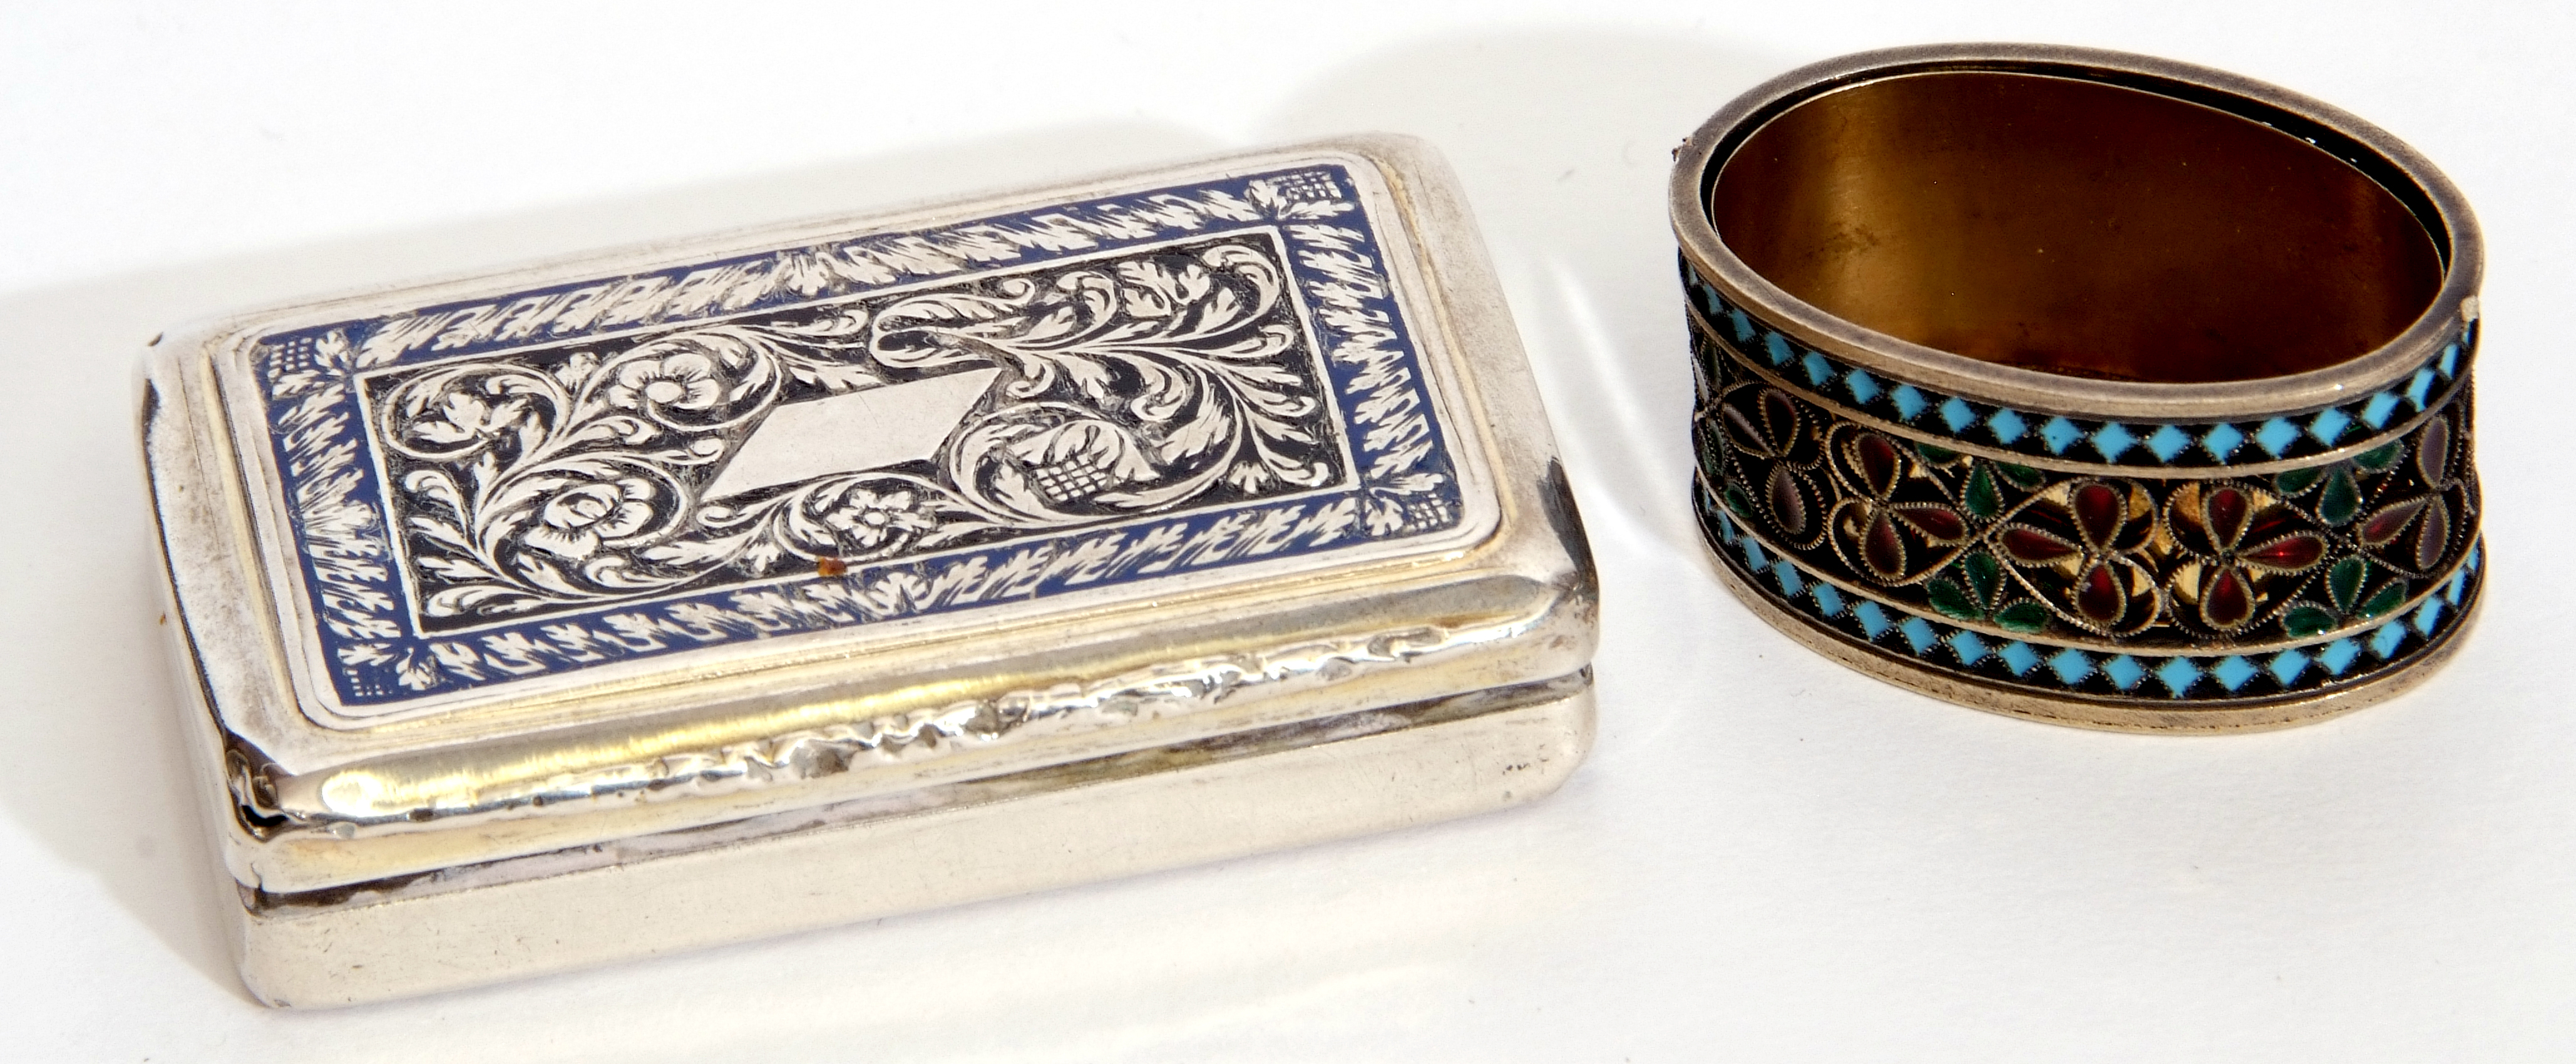 Late 19th/early 20th century Austro-Hungarian snuff box of rectangular form, the lid with chased